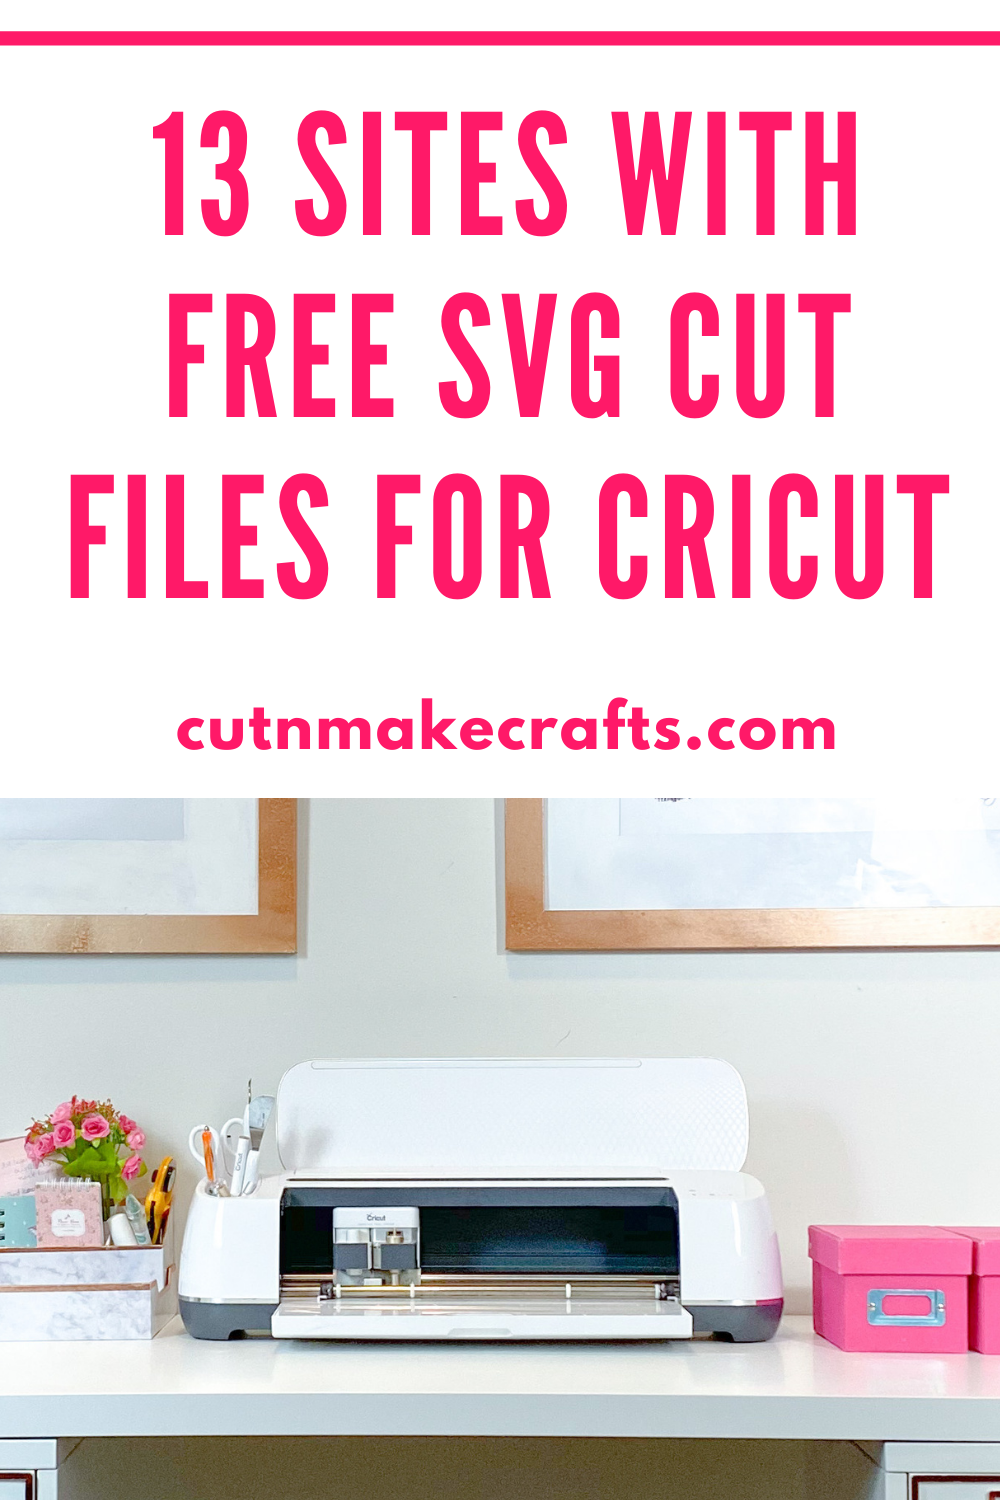 Download 13 Sites With Free Svg Cut Files For Cricut Cut N Make Crafts SVG, PNG, EPS, DXF File